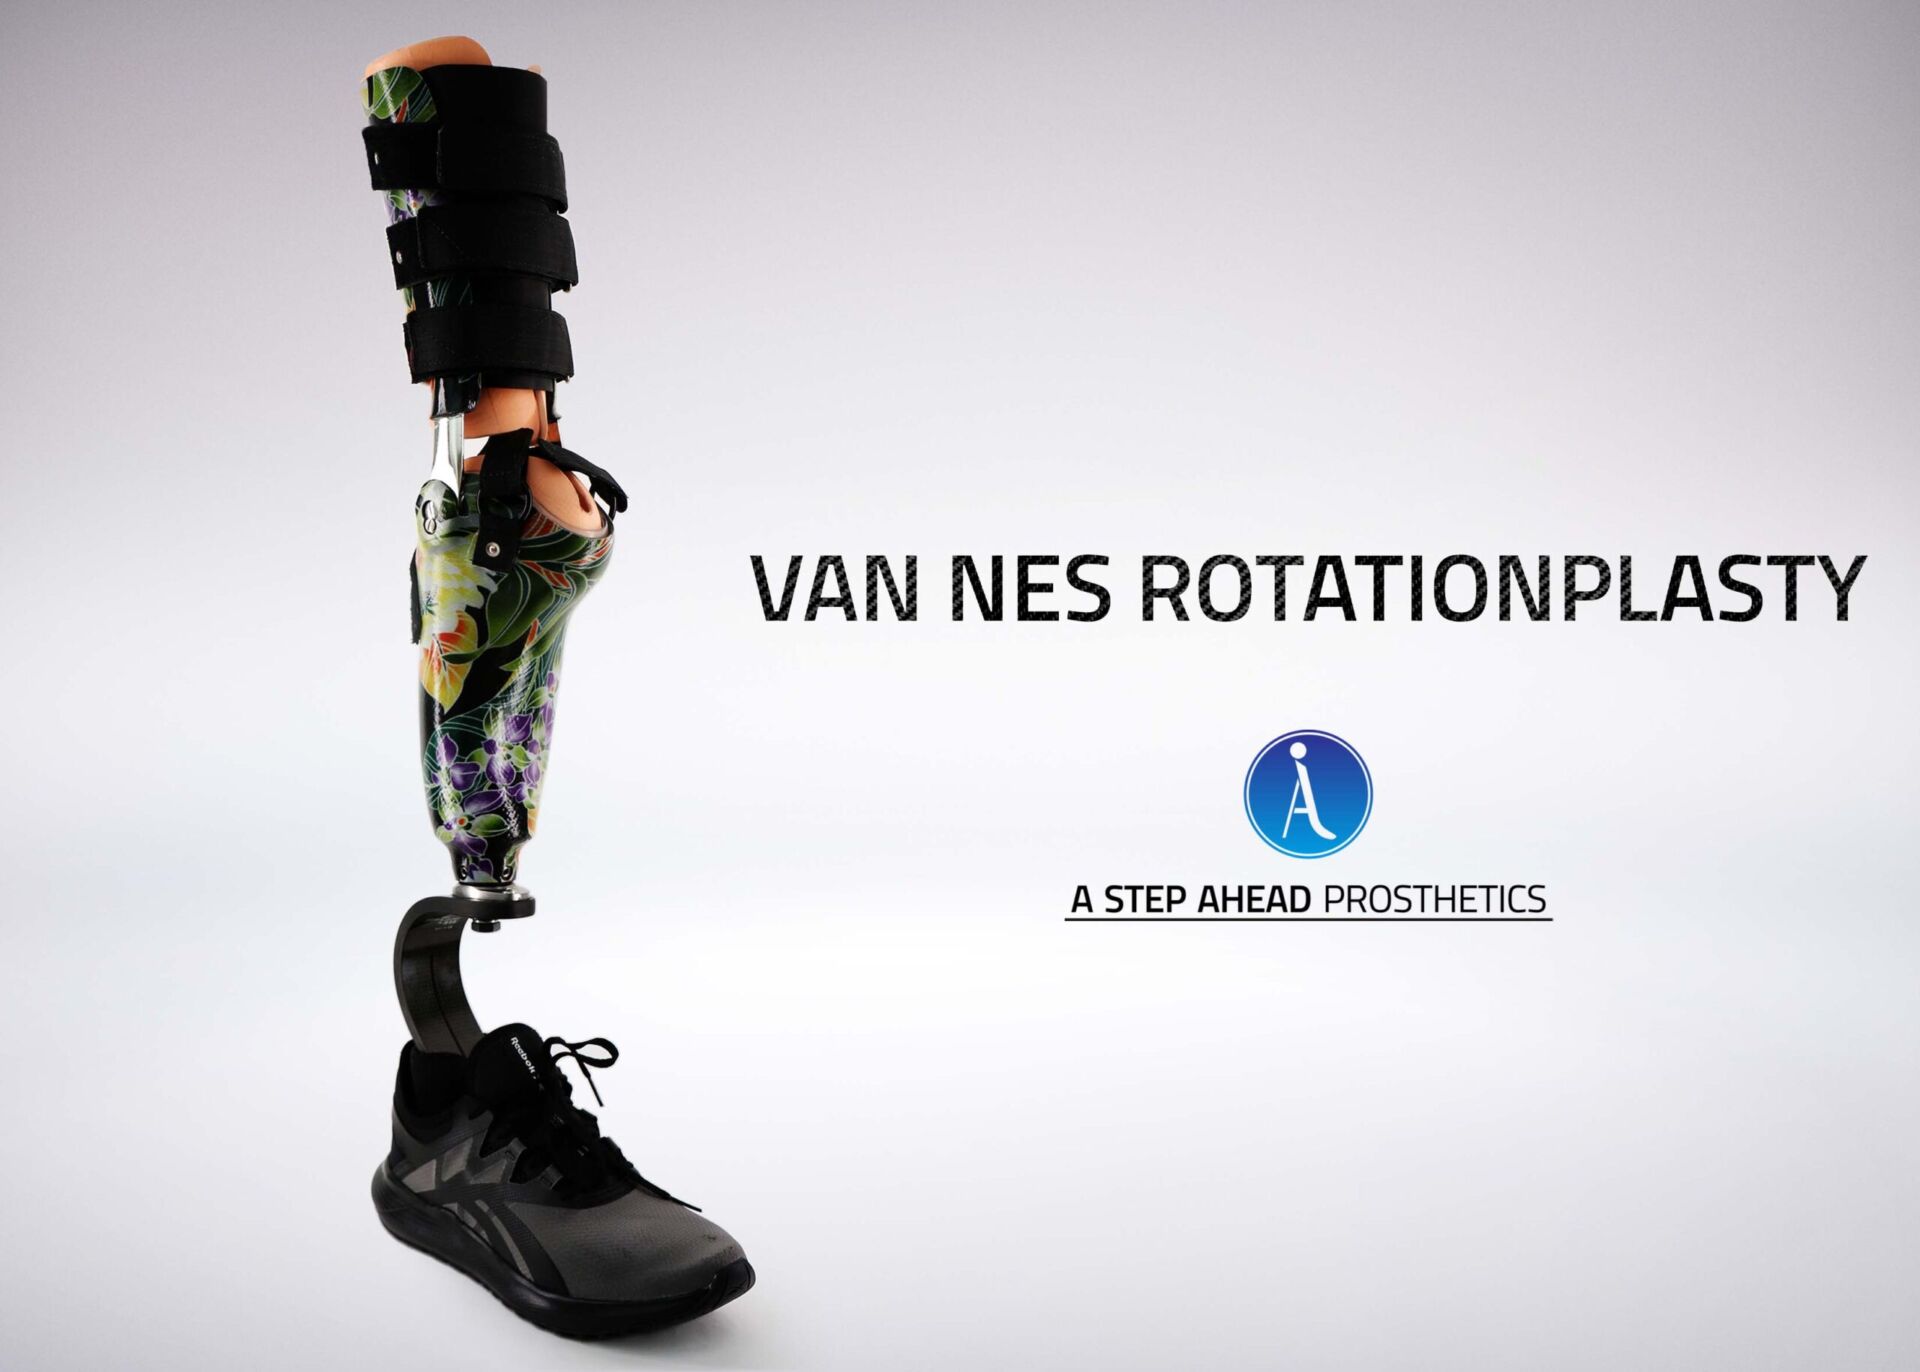 Rotationplasty prosthetic legs for amputees.